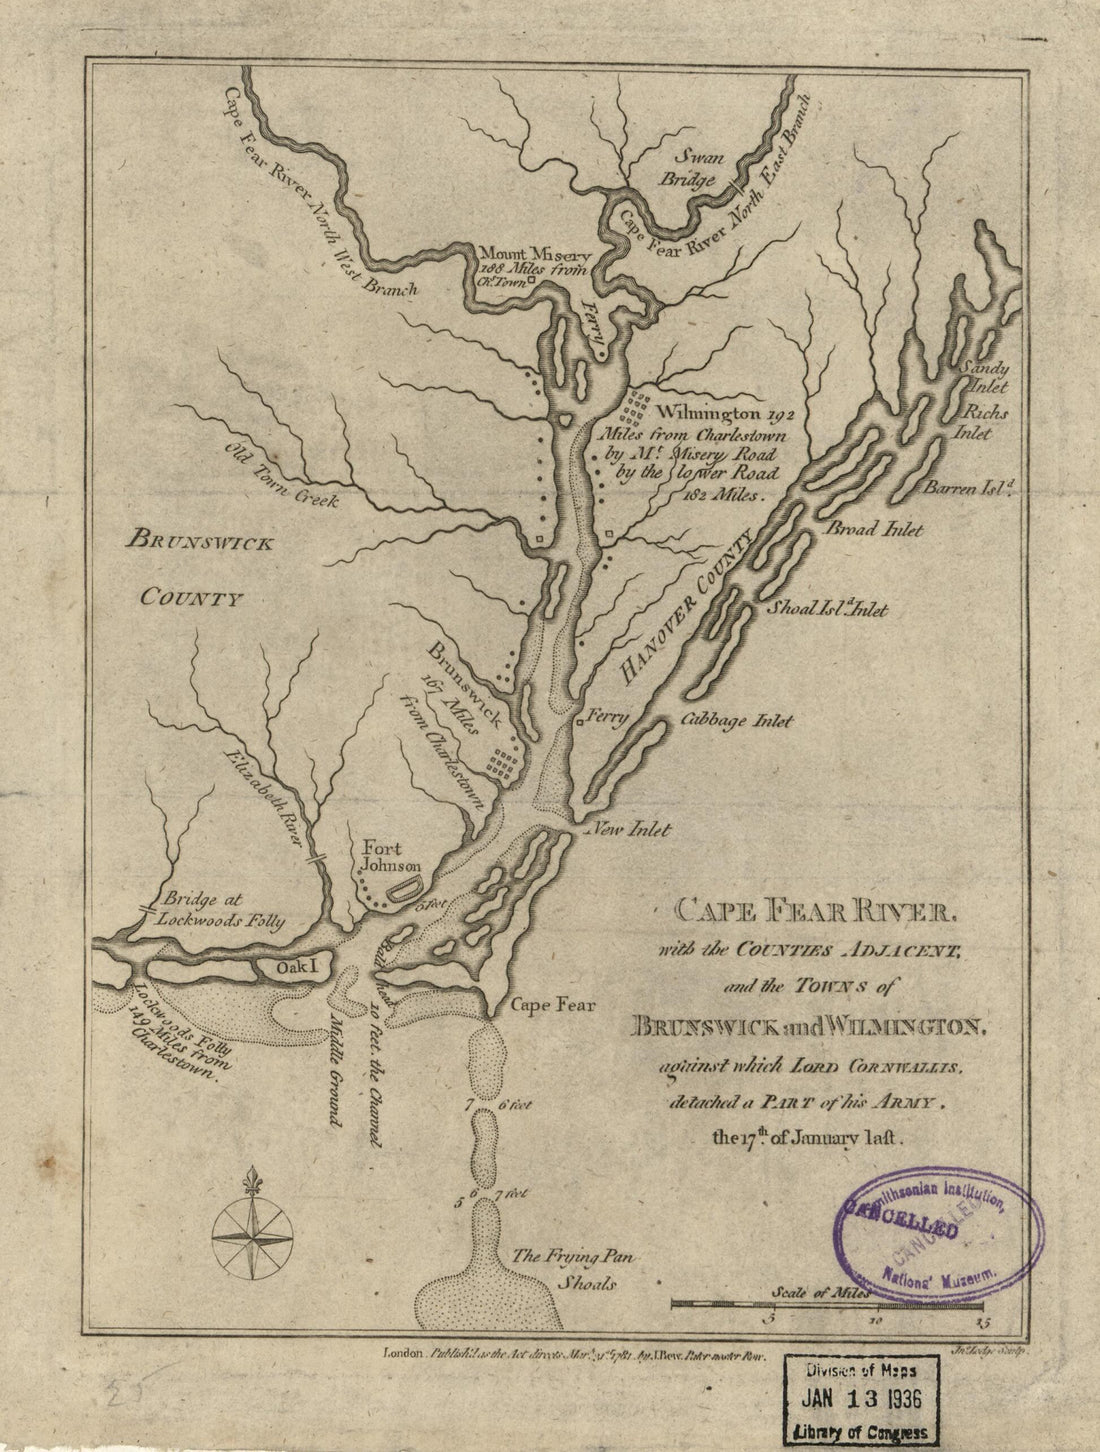 This old map of Cape Fear River, With the Counties Adjacent, and the Towns of Brunswick and Wilmington, Against Which Lord Cornwallis, Detached a Part of His Army, the 17th of January Laft Jno. Lodge, Sculp from 1781 was created by John Bew, John Lodge i